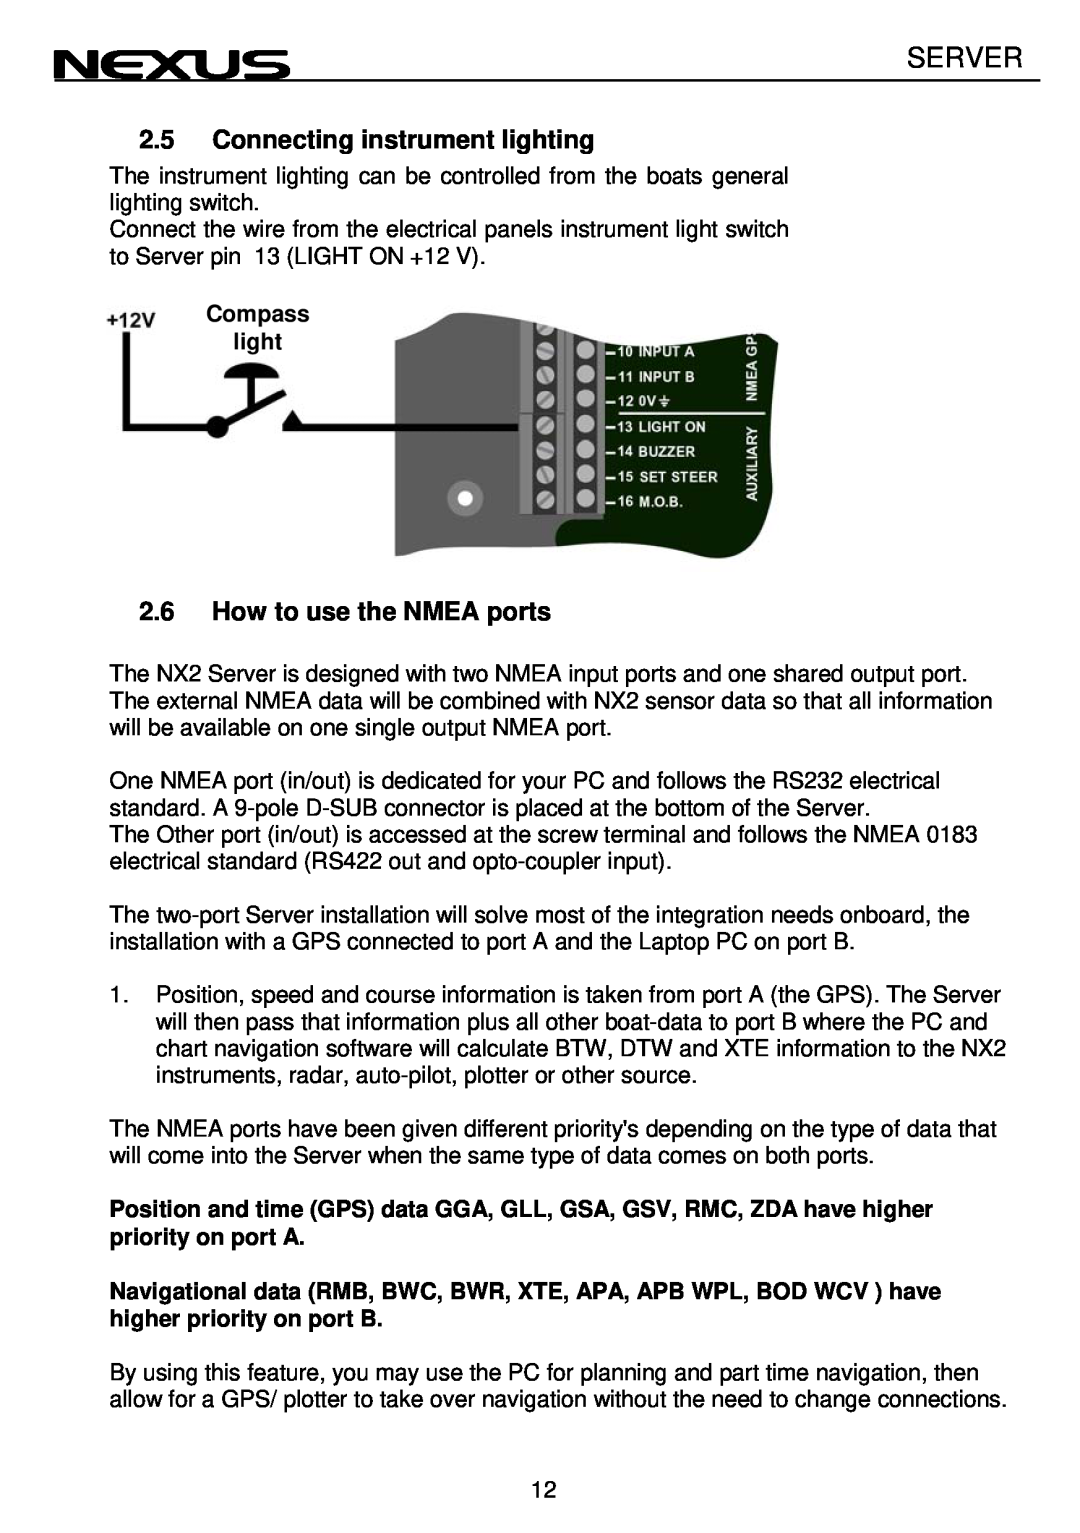 Nexus 21 NX2 operation manual Connecting instrument lighting, How to use the NMEA ports, Server 